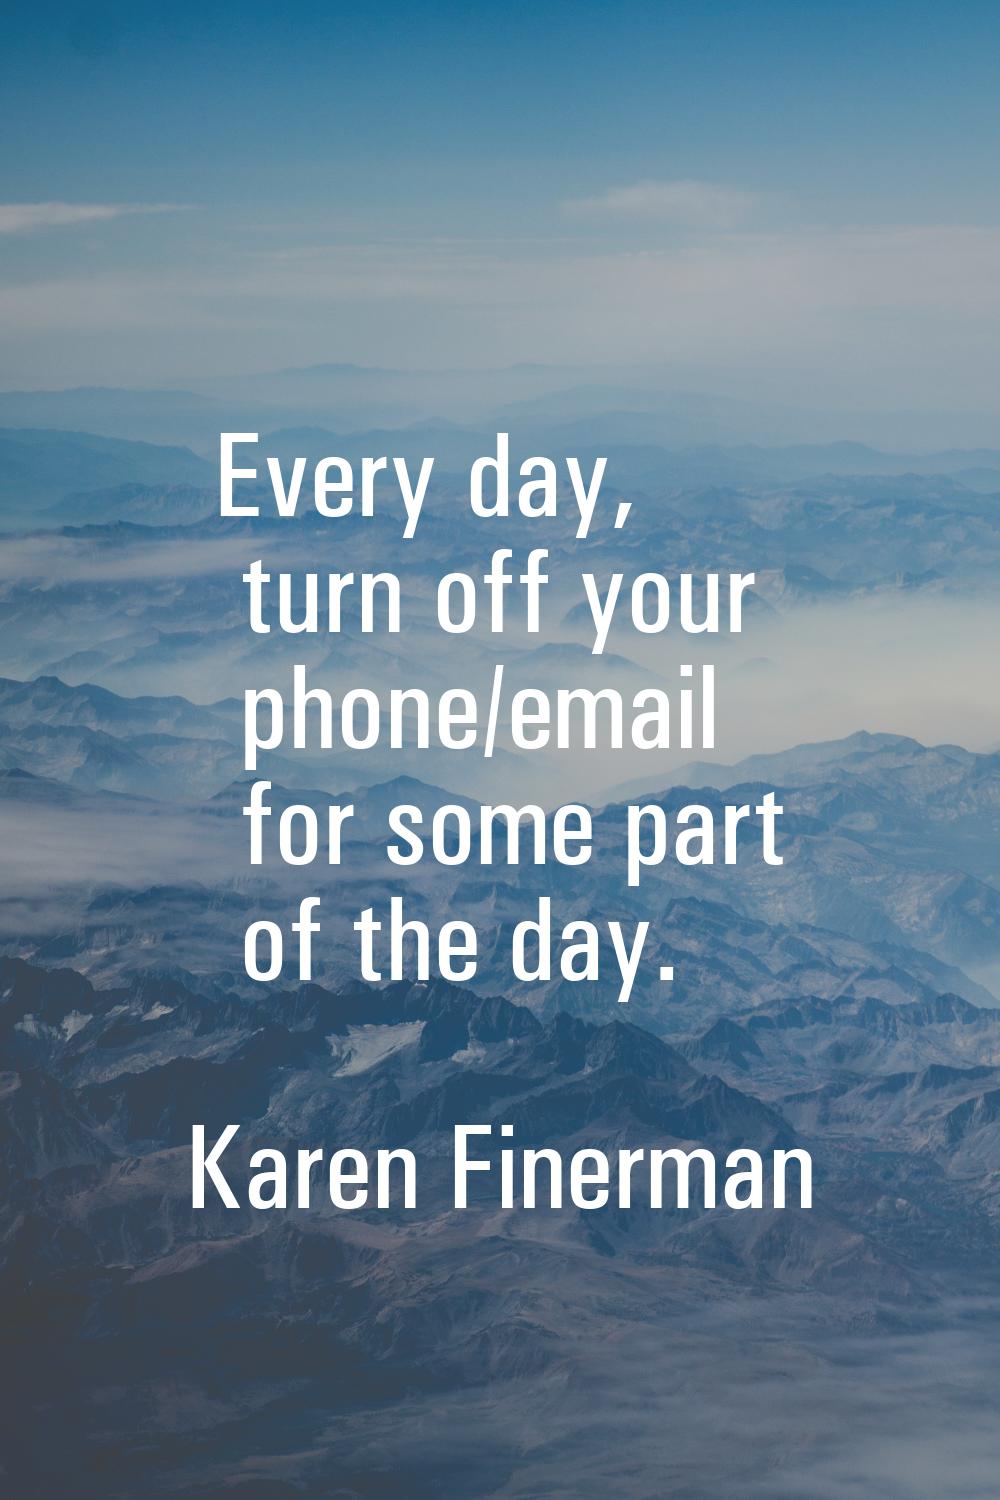 Every day, turn off your phone/email for some part of the day.